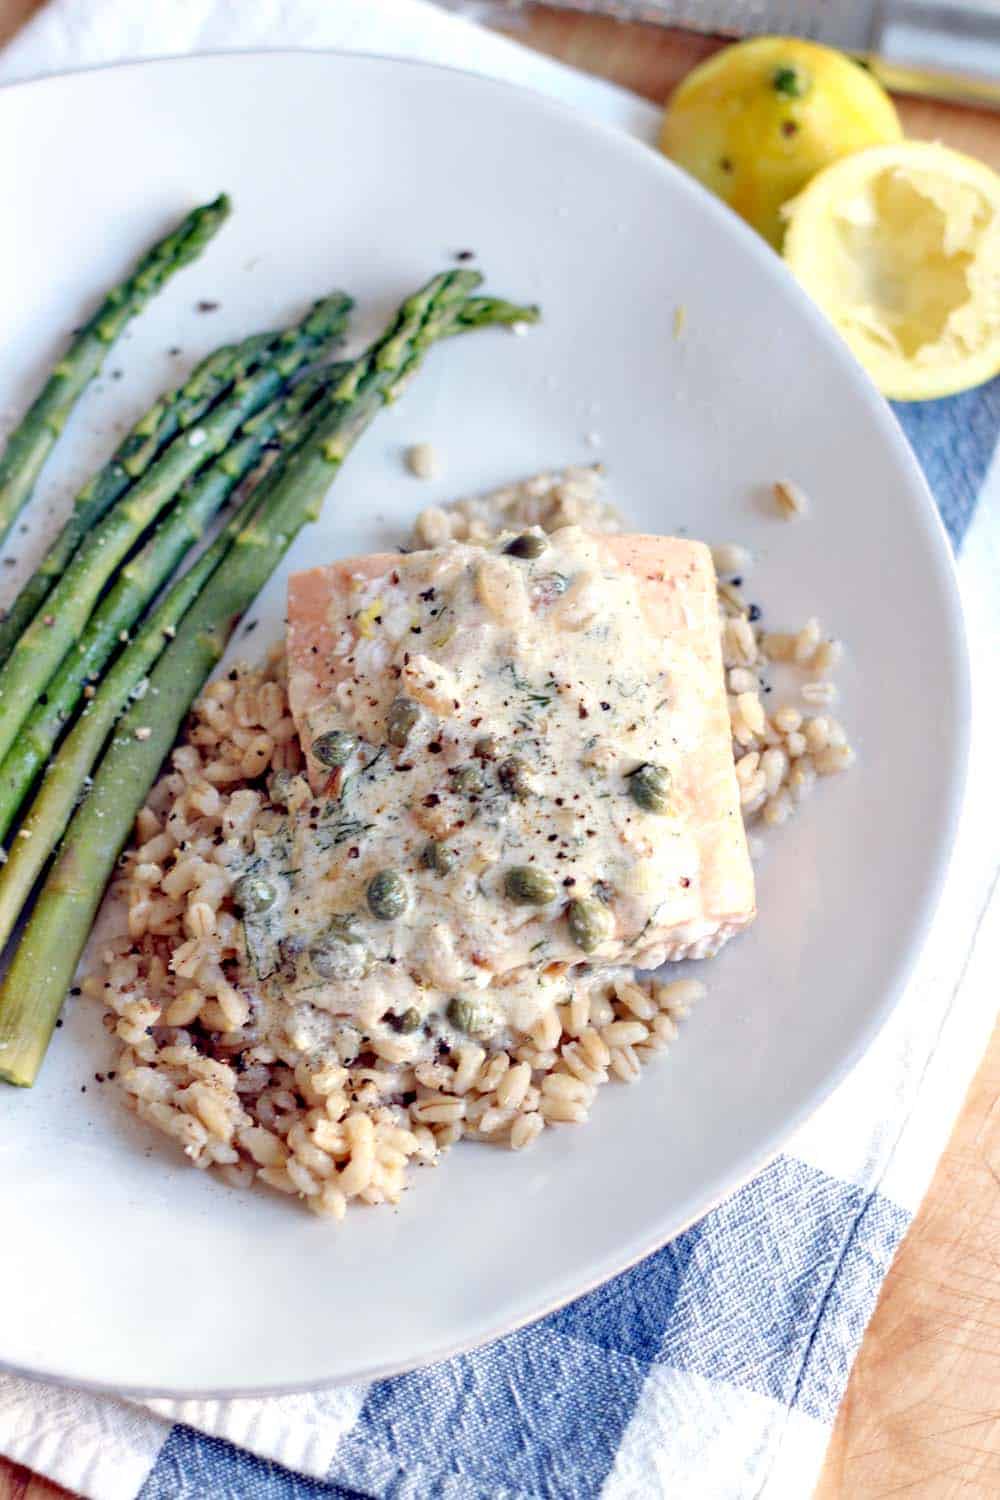 Bird's eye view of white plate holding Garlic Poached Salmon with Creamy Lemon Caper Sauce over rice, with asparagus on the side.